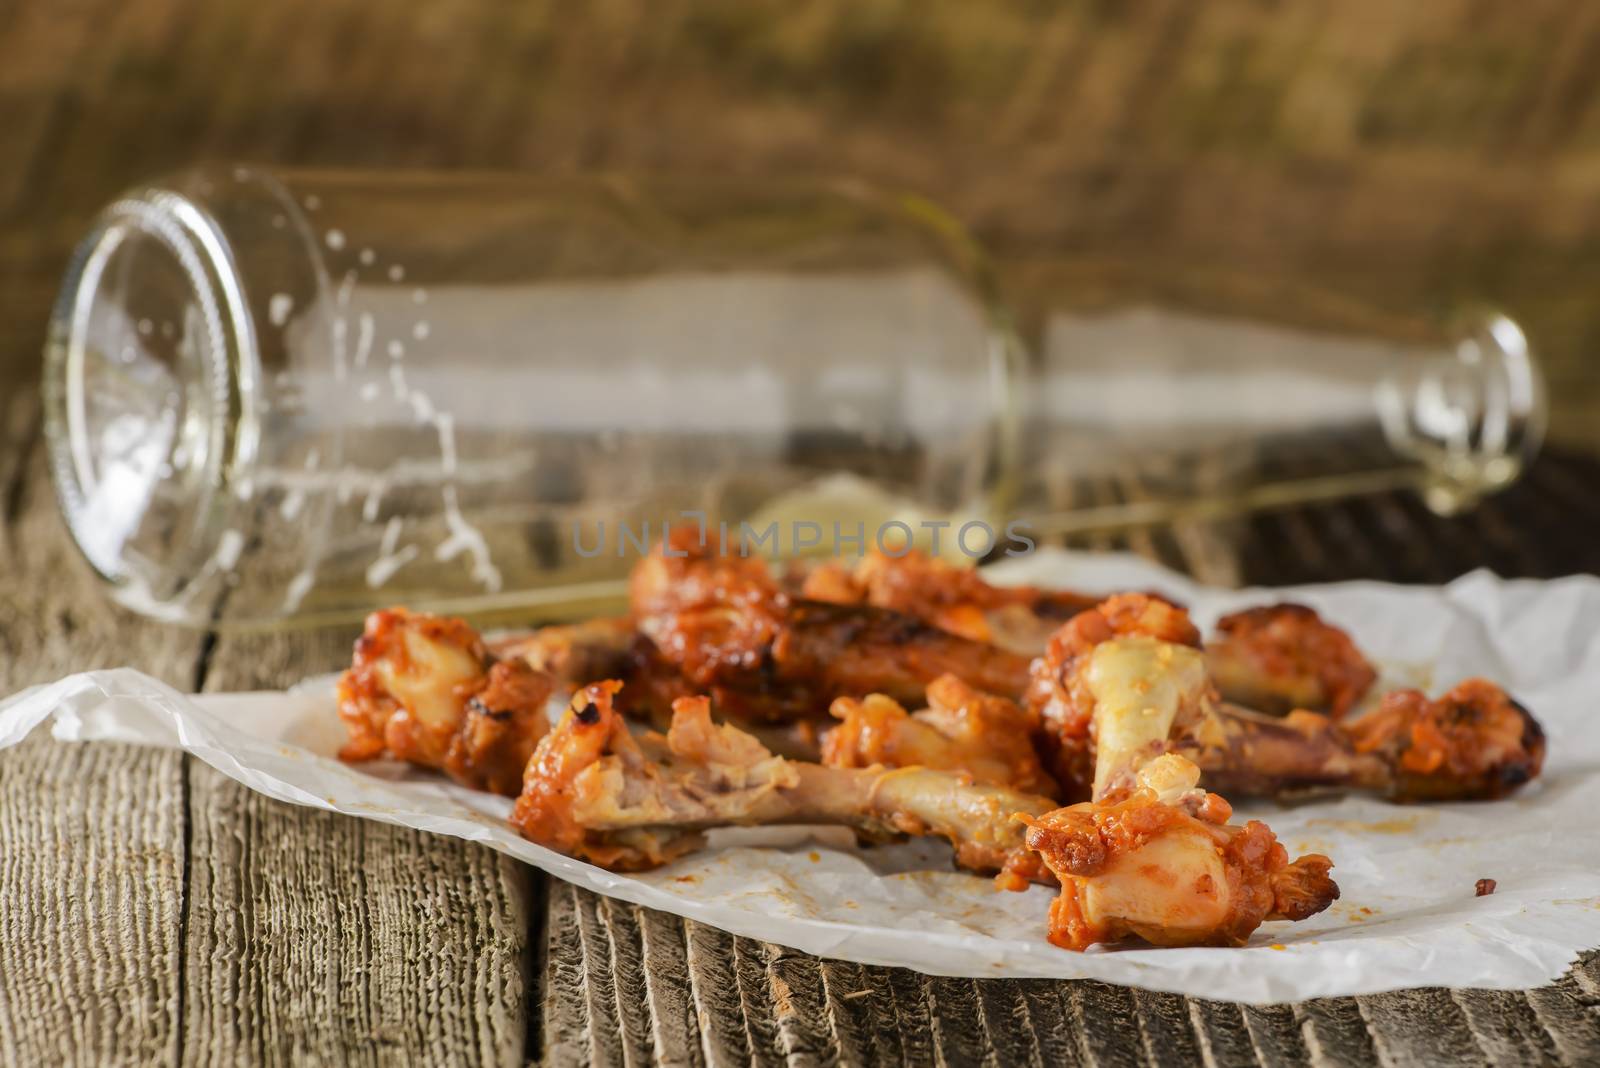 Pile of eaten barbecued chicken wings on a rustic wood background.